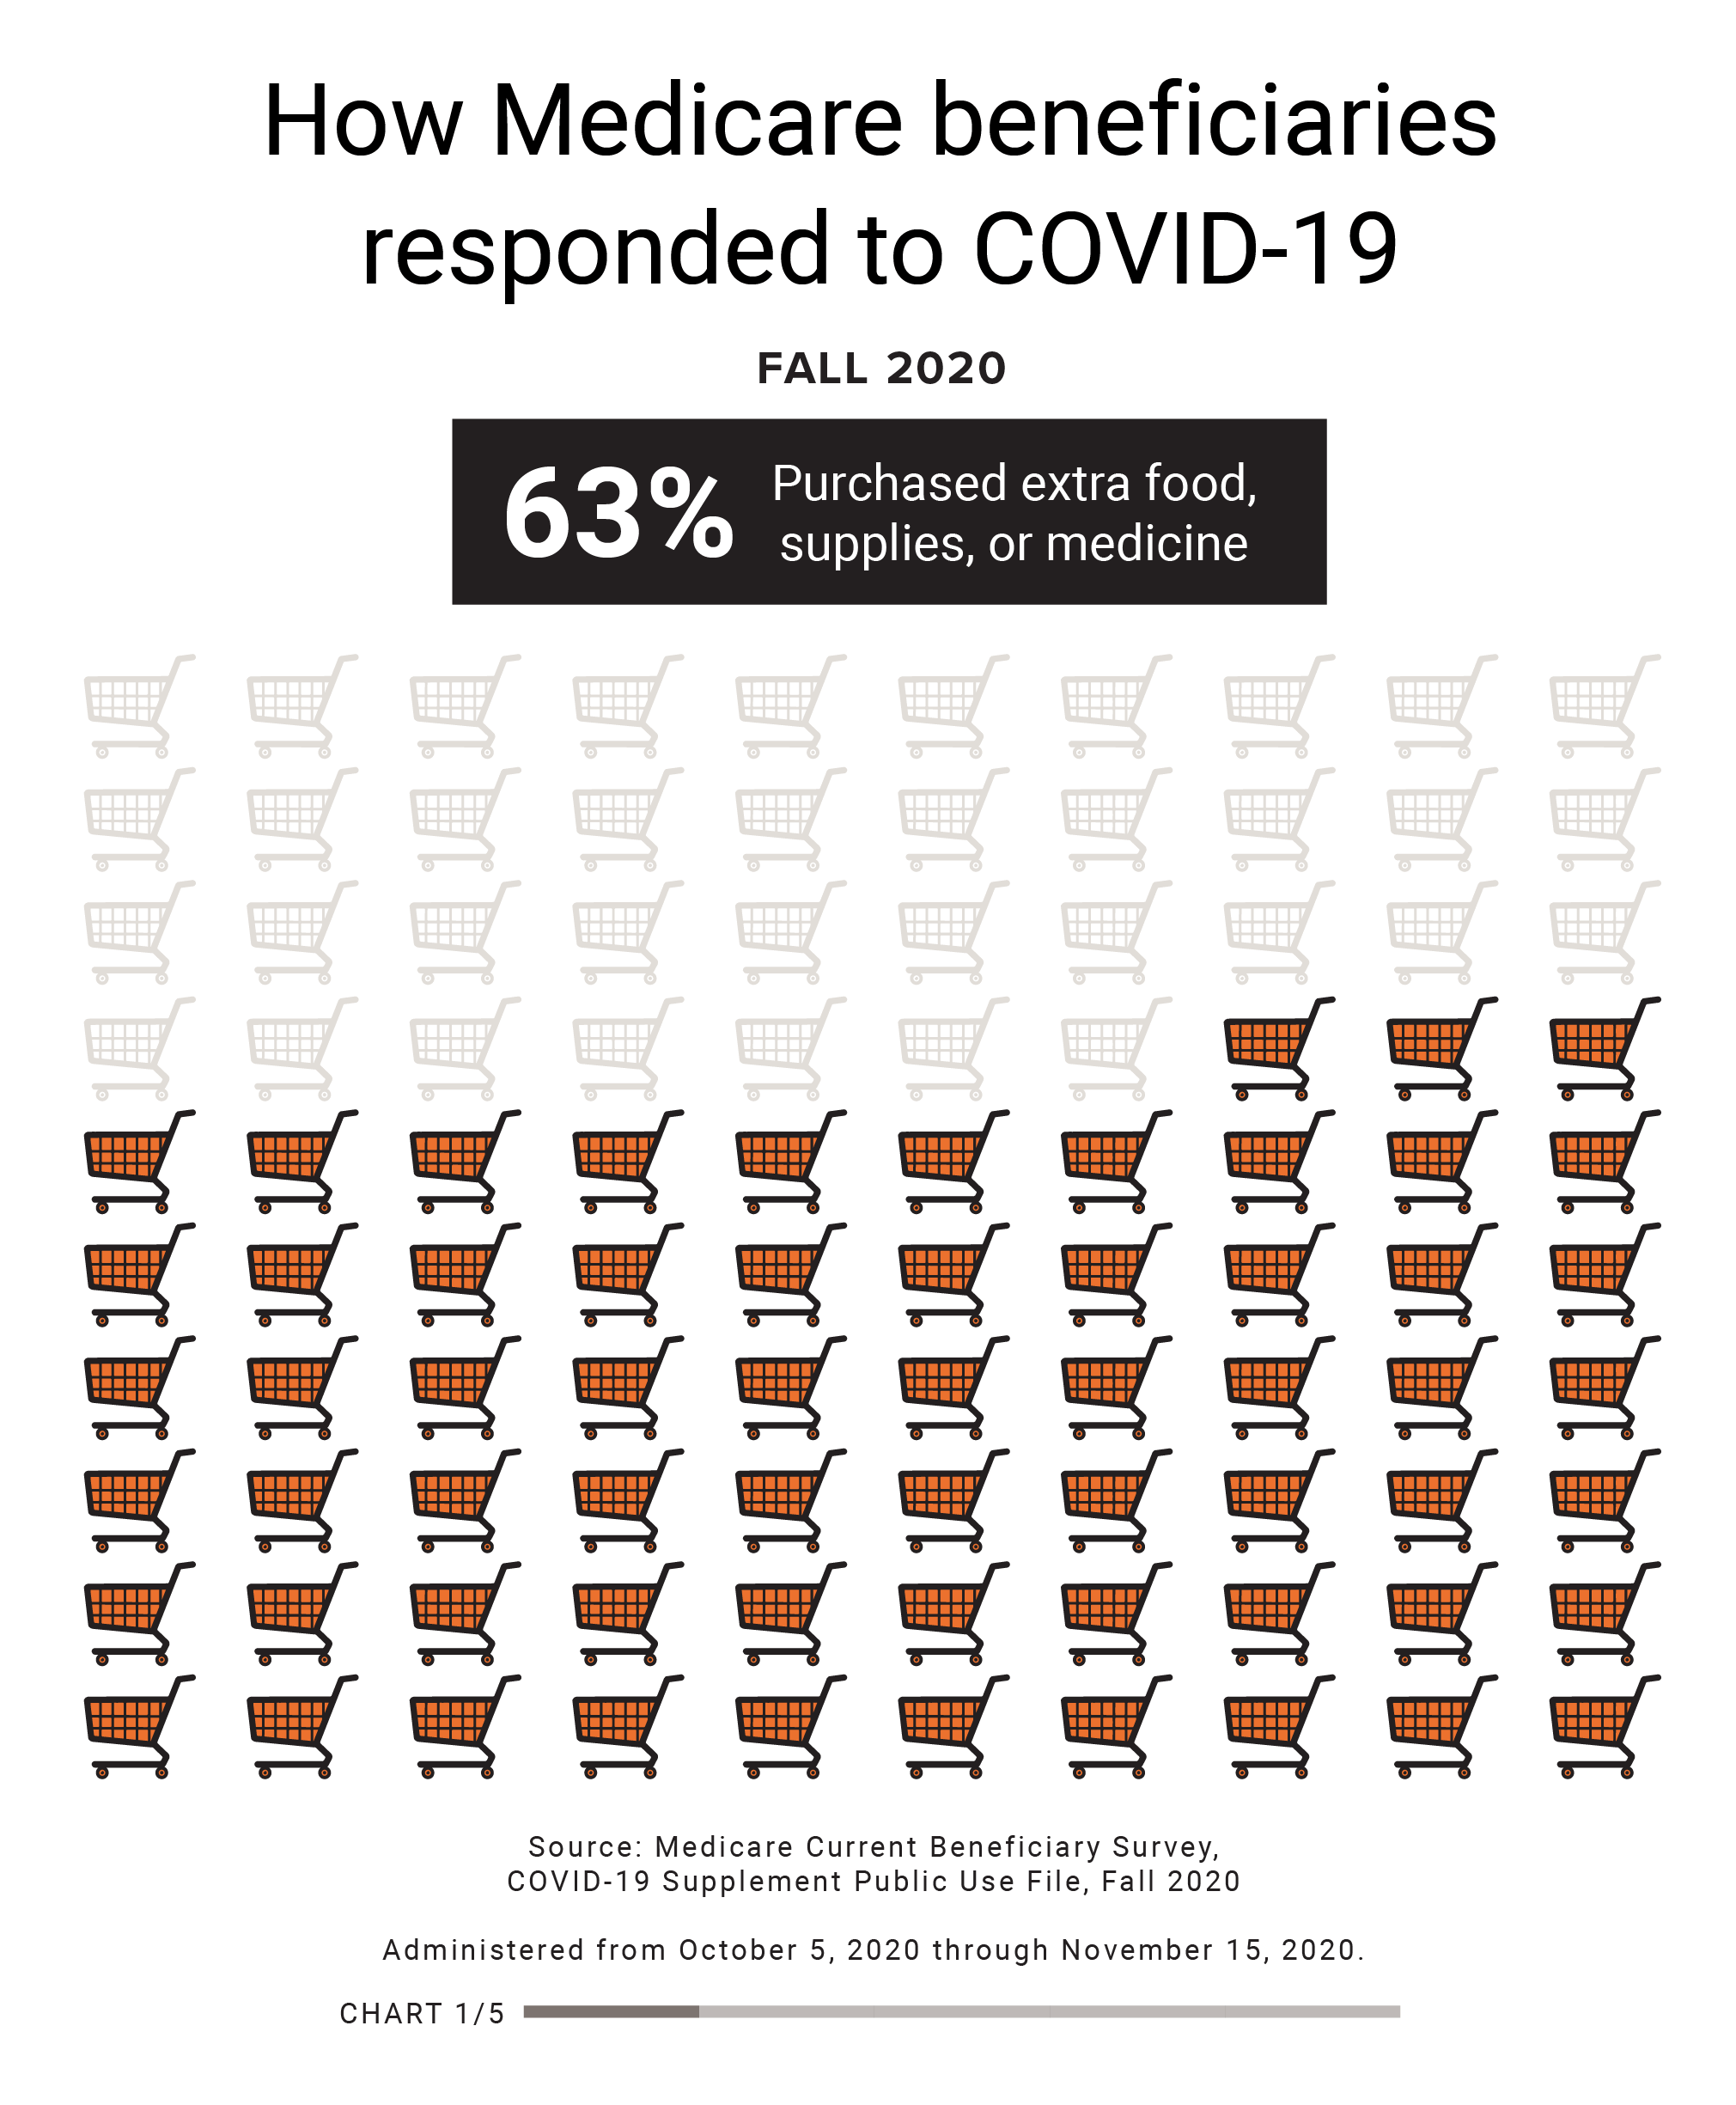 Visualization on How Medicare beneficiaries responded to COVID-19